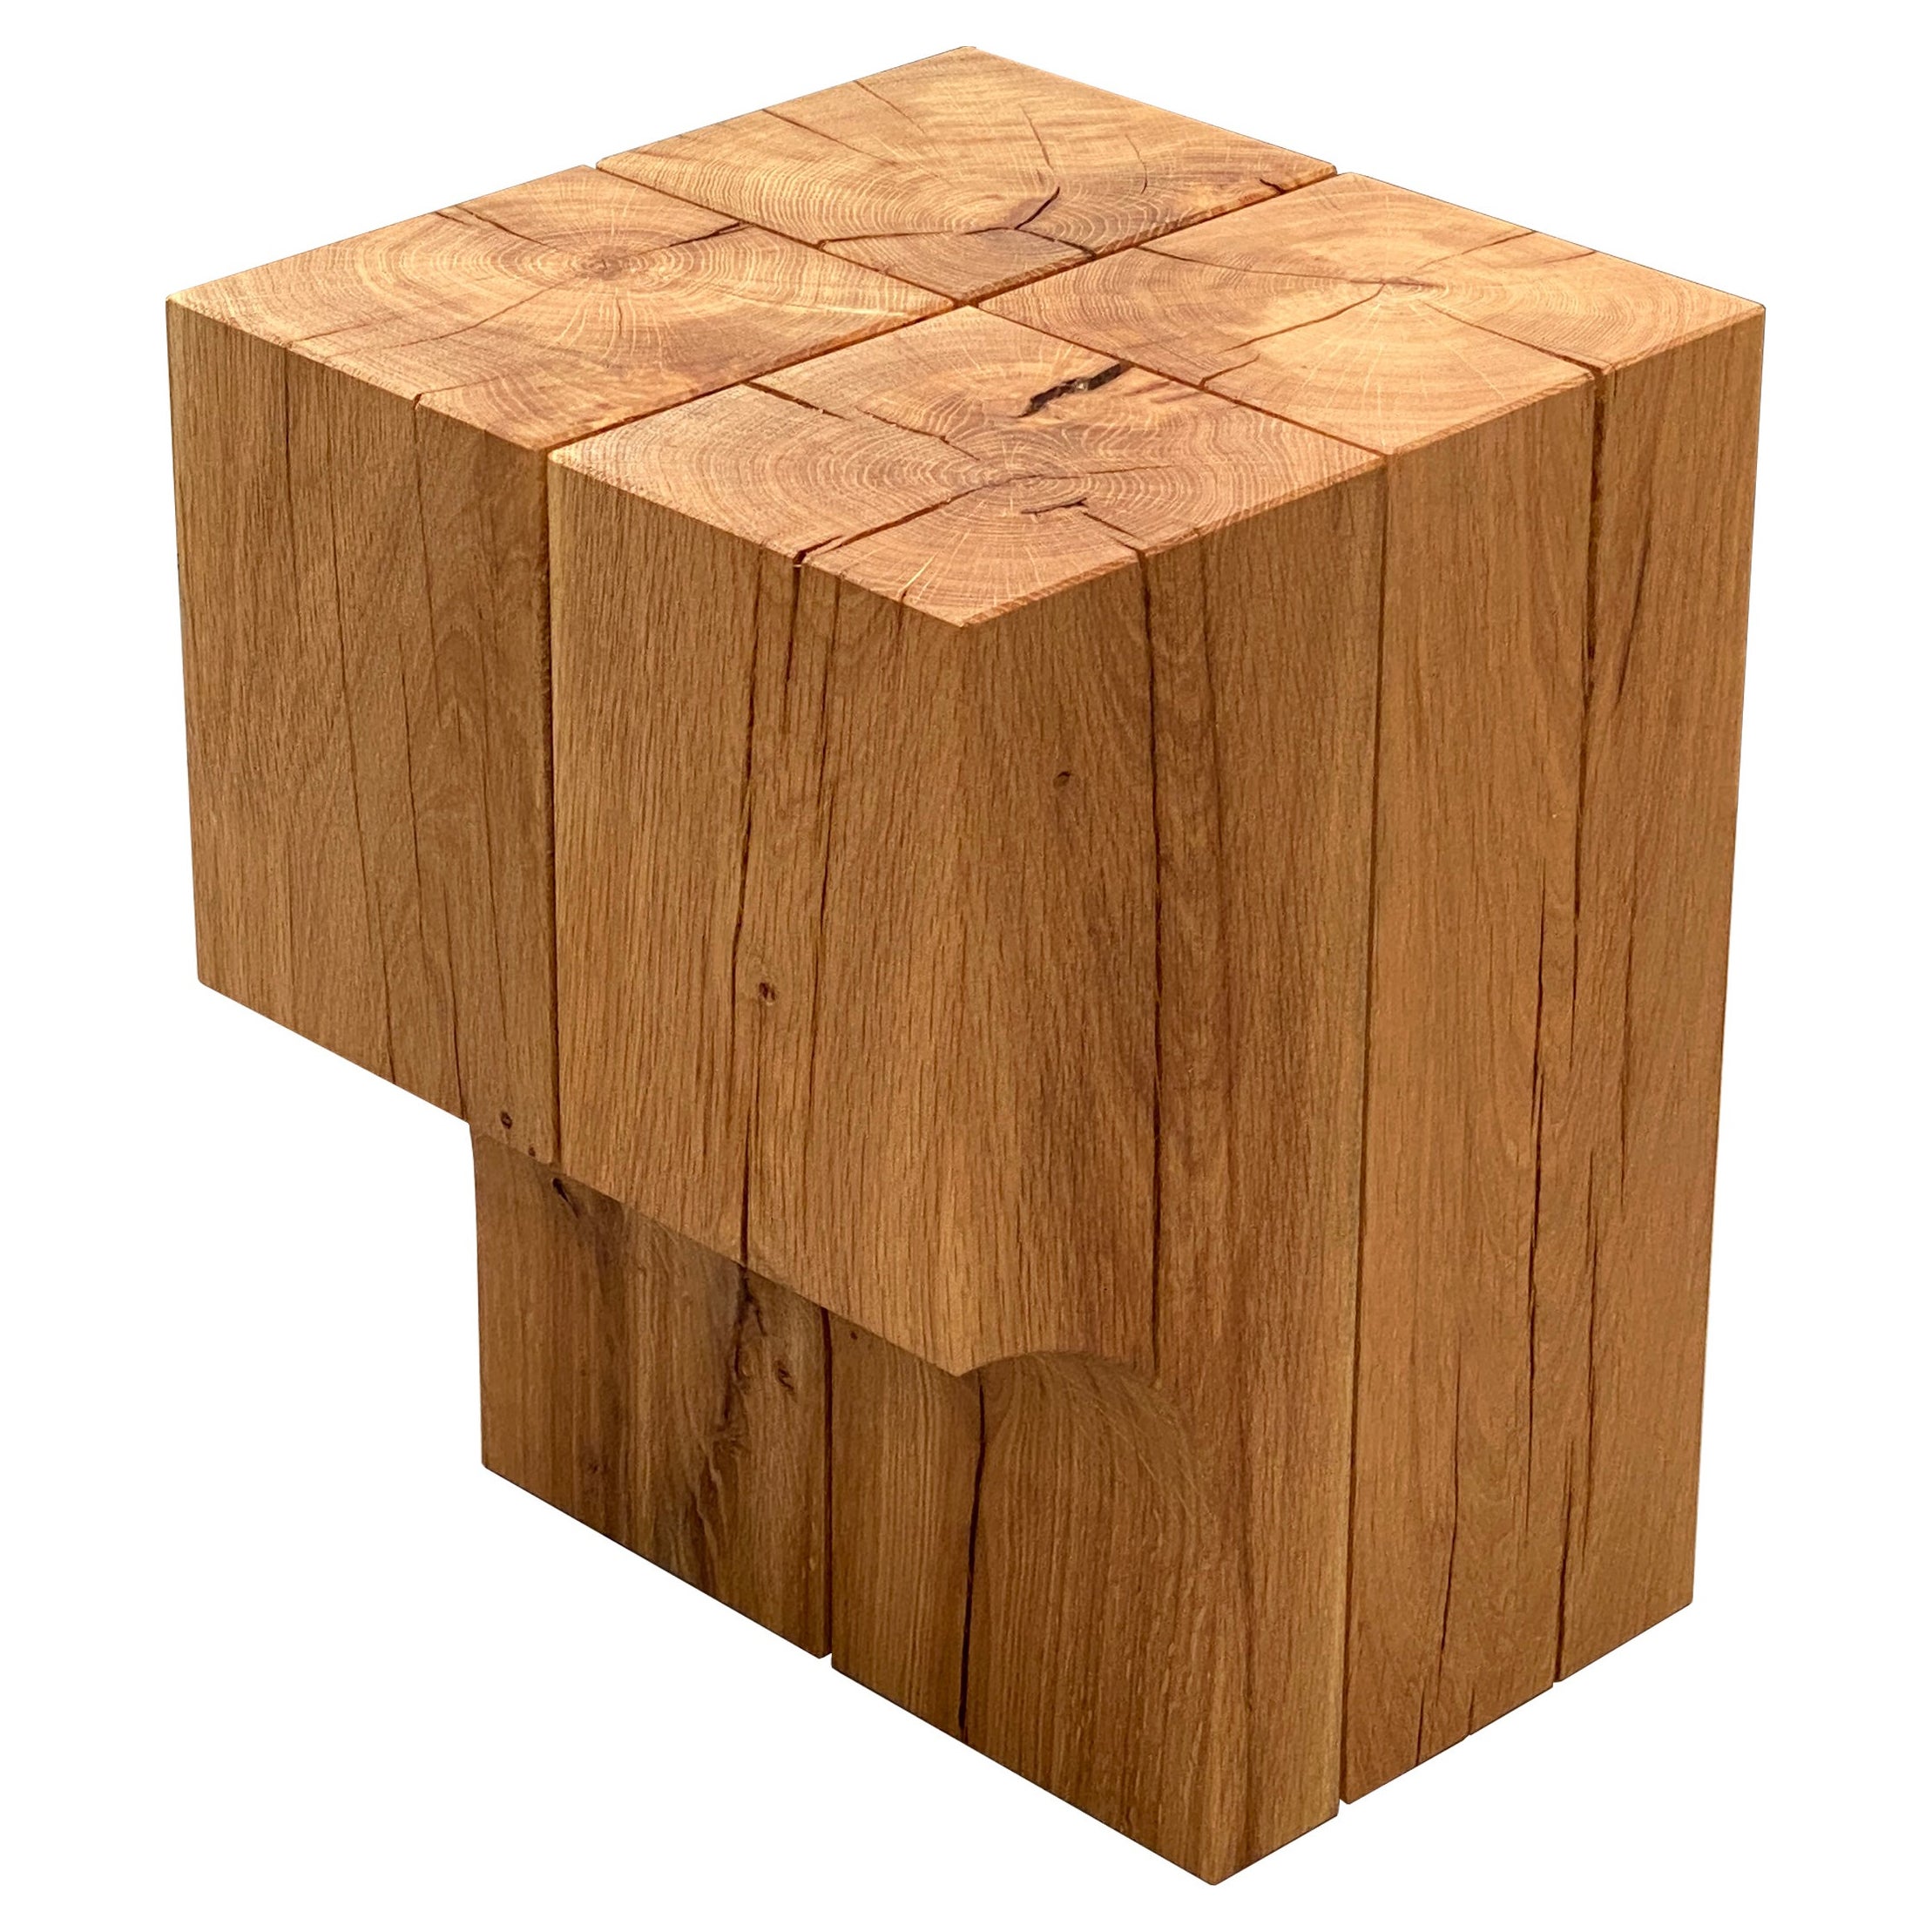 Contemporary arch stool side table, natural oak & brass details, Belgian design